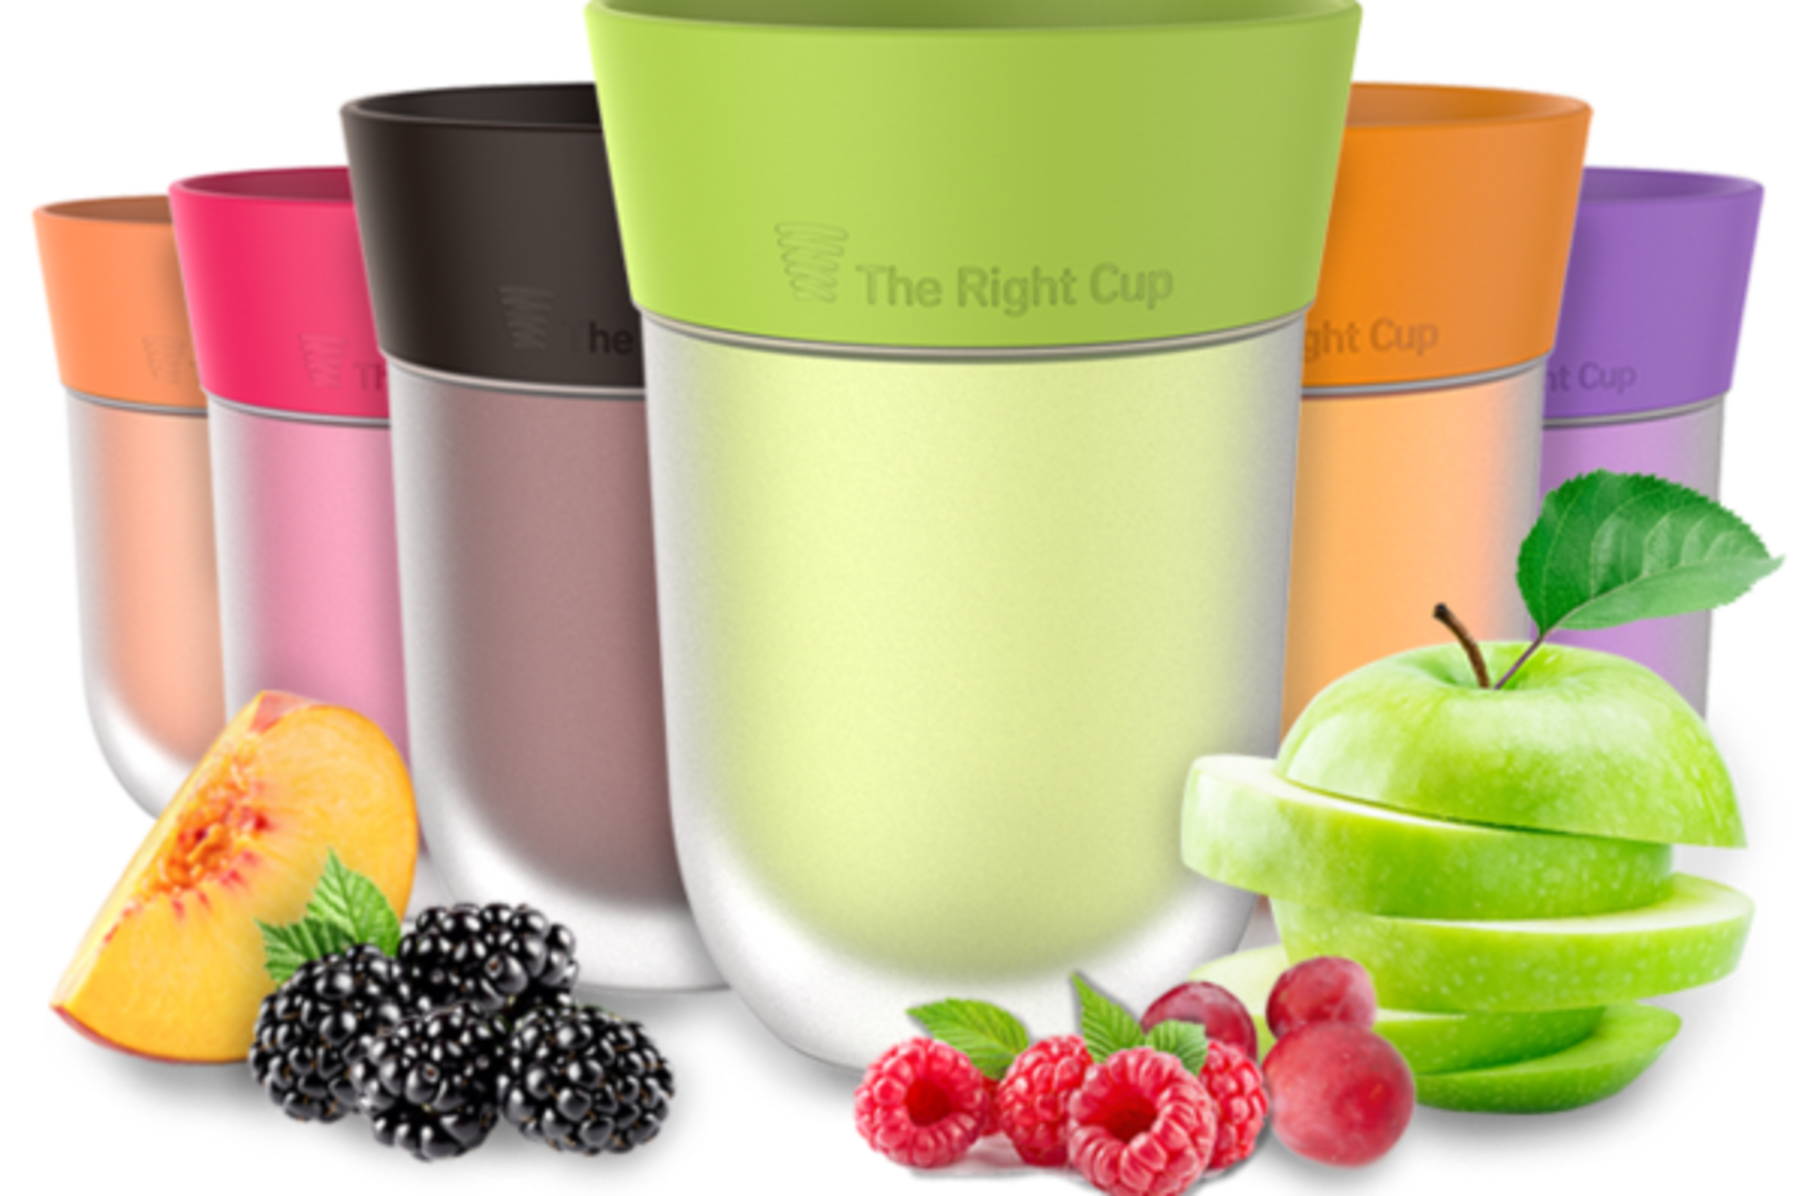 The Right Cup Trick Your Brain Drink More Water Indiegogo